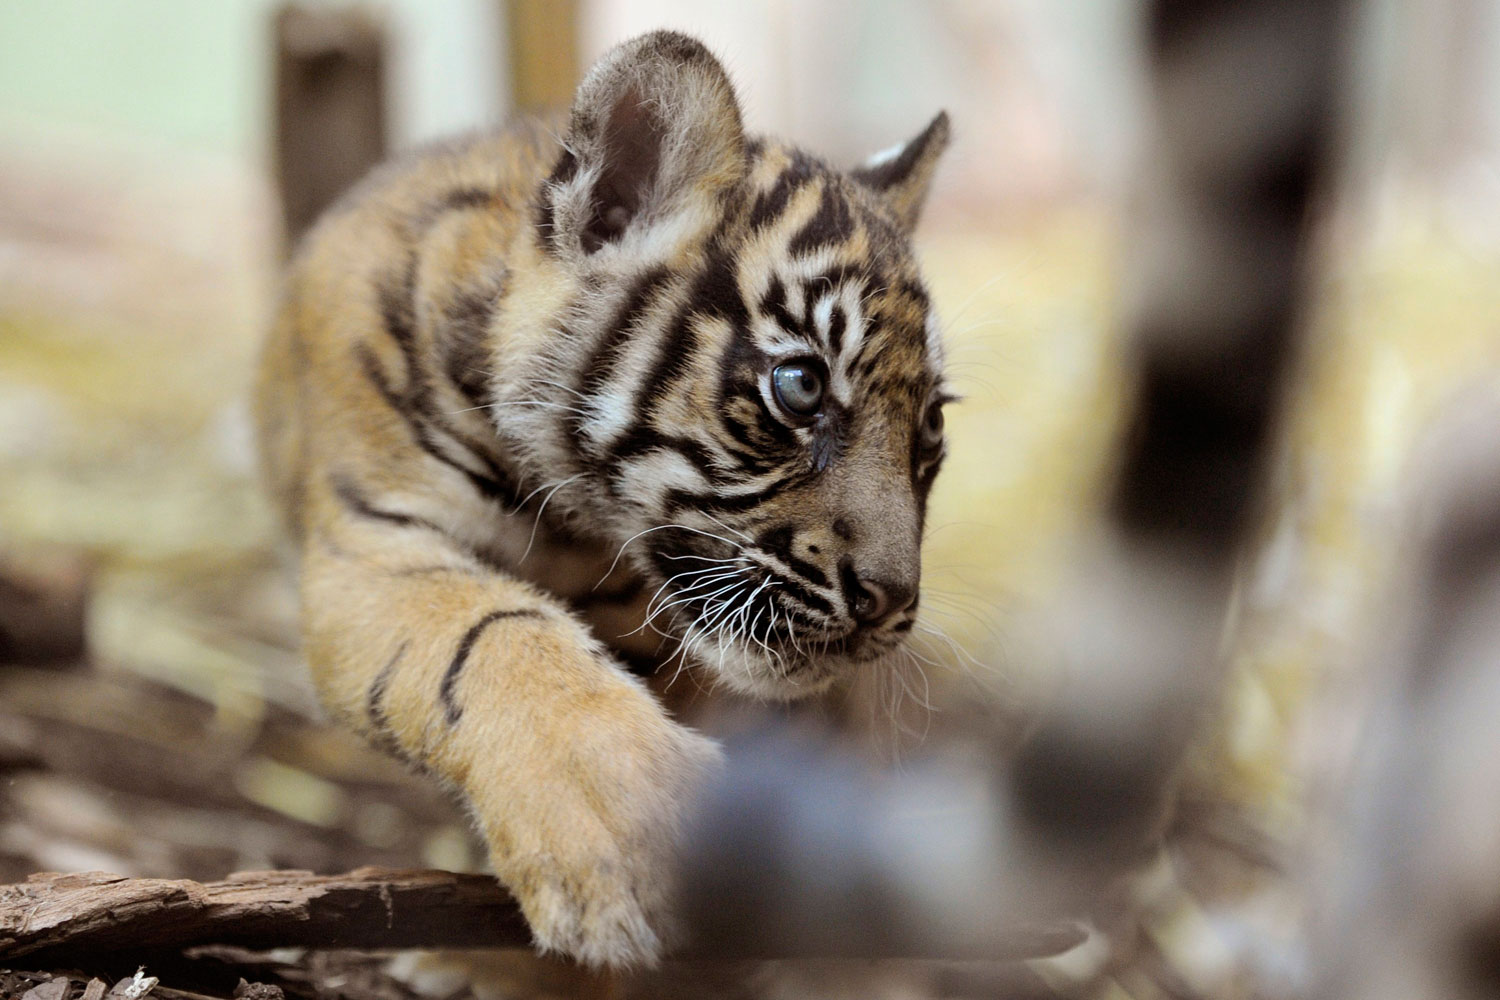 A still nameless tiger baby plays in its compound at the zoo in Frankfurt, Germany, July 5, 2011. The young tiger and its nameless sibling, children of tiger Malea, are the latest attraction in the zoo and draw a large audience.